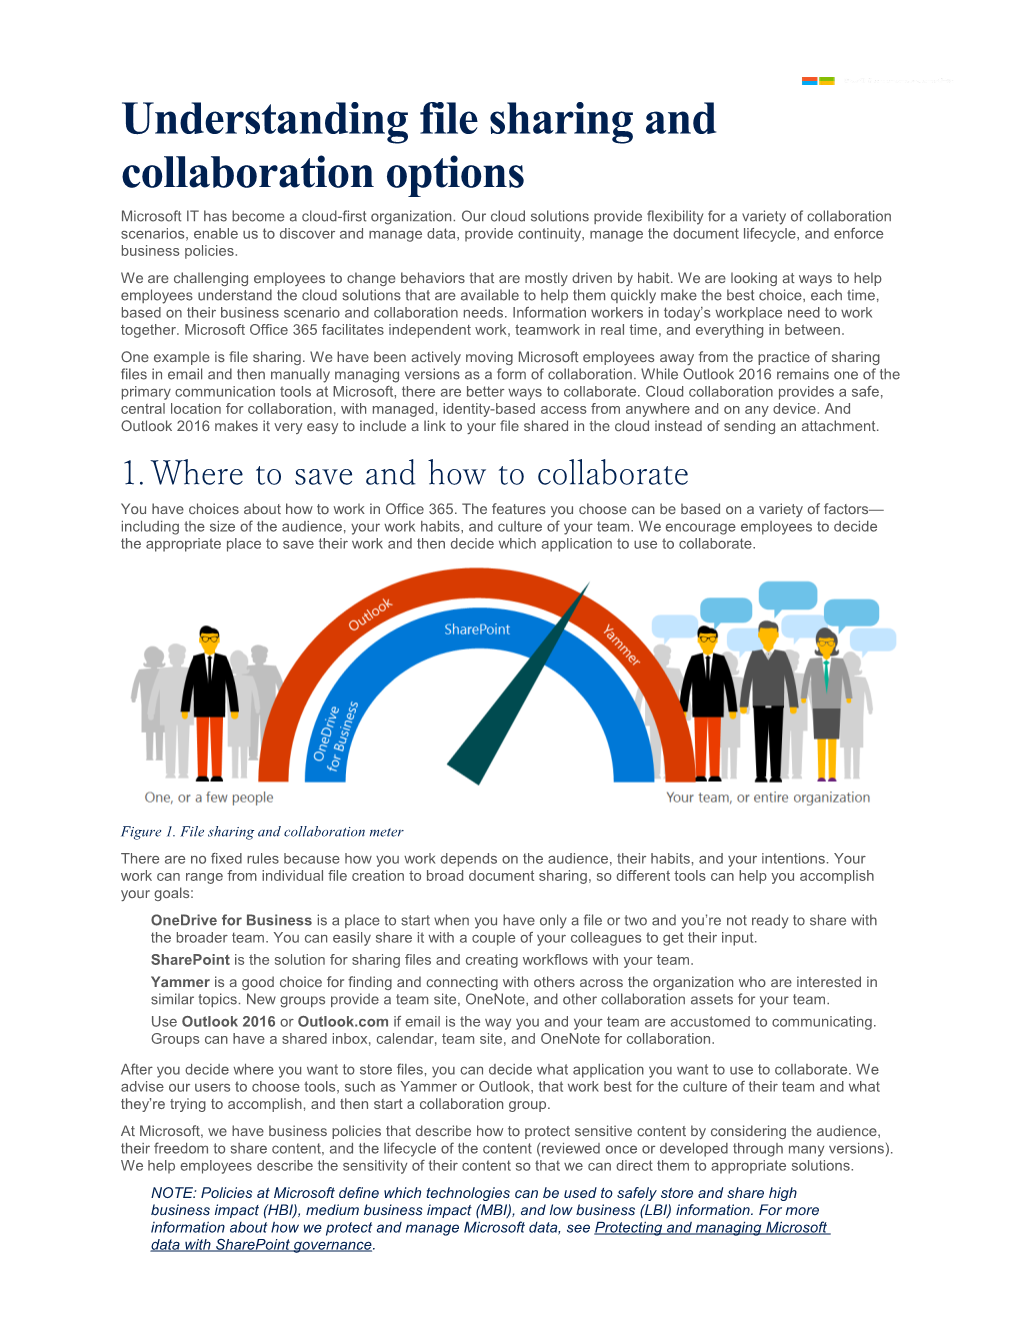 Understanding File Sharing and Collaboration Options